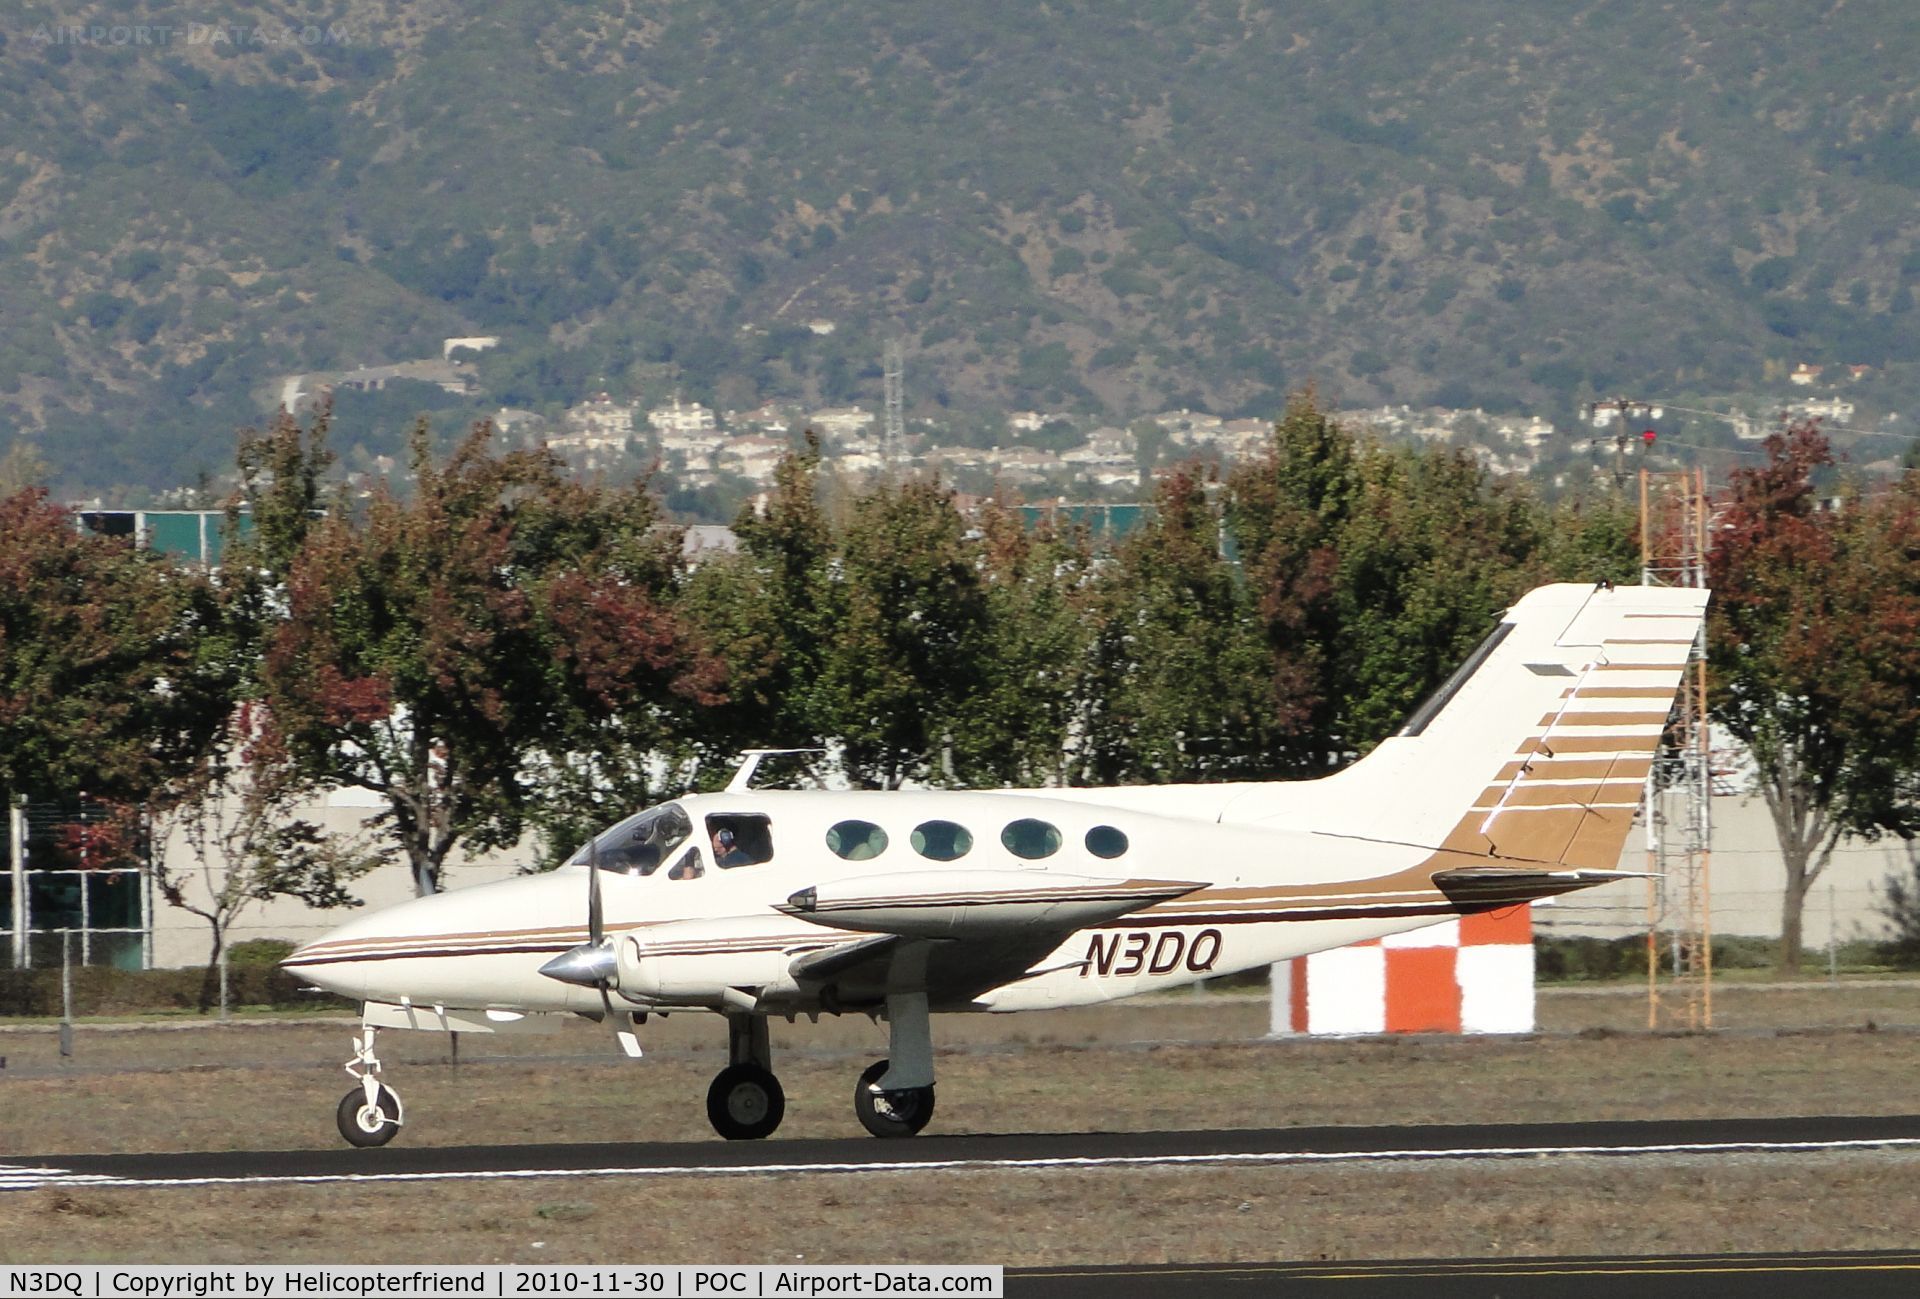 N3DQ, 1970 Cessna 414 Chancellor C/N 414-0056, Take off rolling westbound on runway 26L for south departure